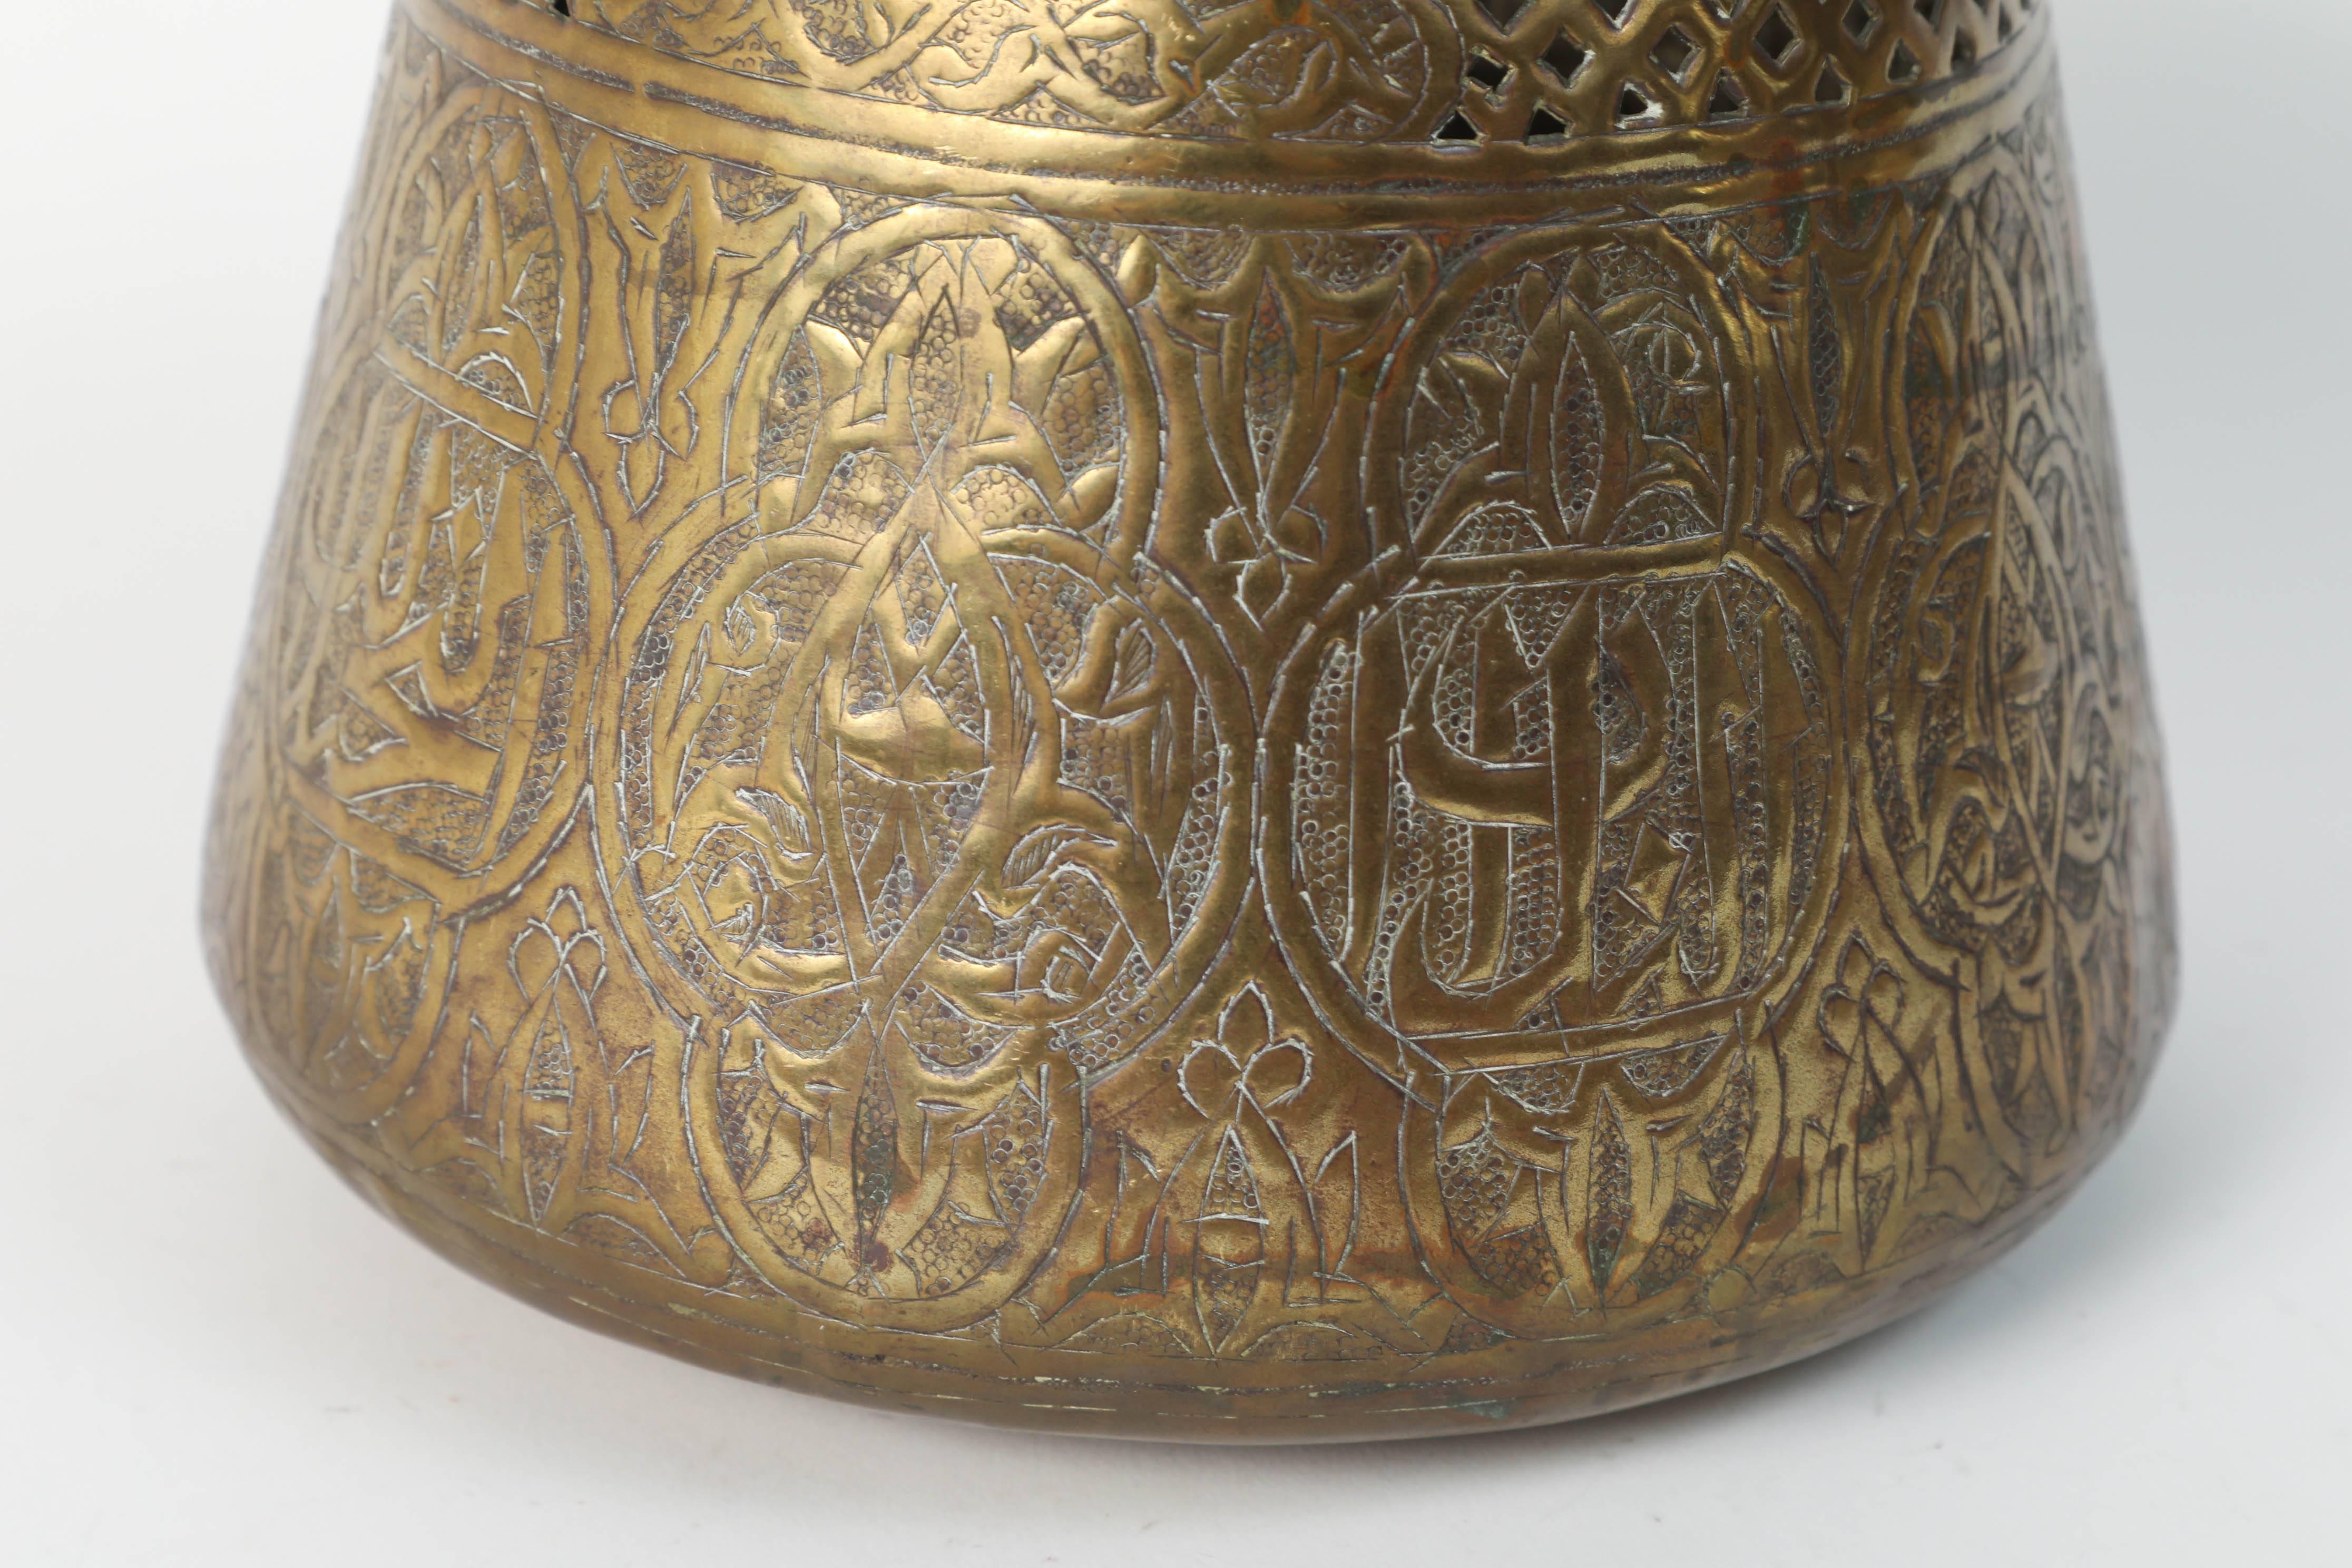 19th century Middle Eastern Islamic Syrian brass repousse bowl, finely hand-etched, engraved, hammered and chased with elaborate Moorish Syrian designs decorated with medallions of Arabic calligraphy inscriptions.
Handcrafted brass metal work by